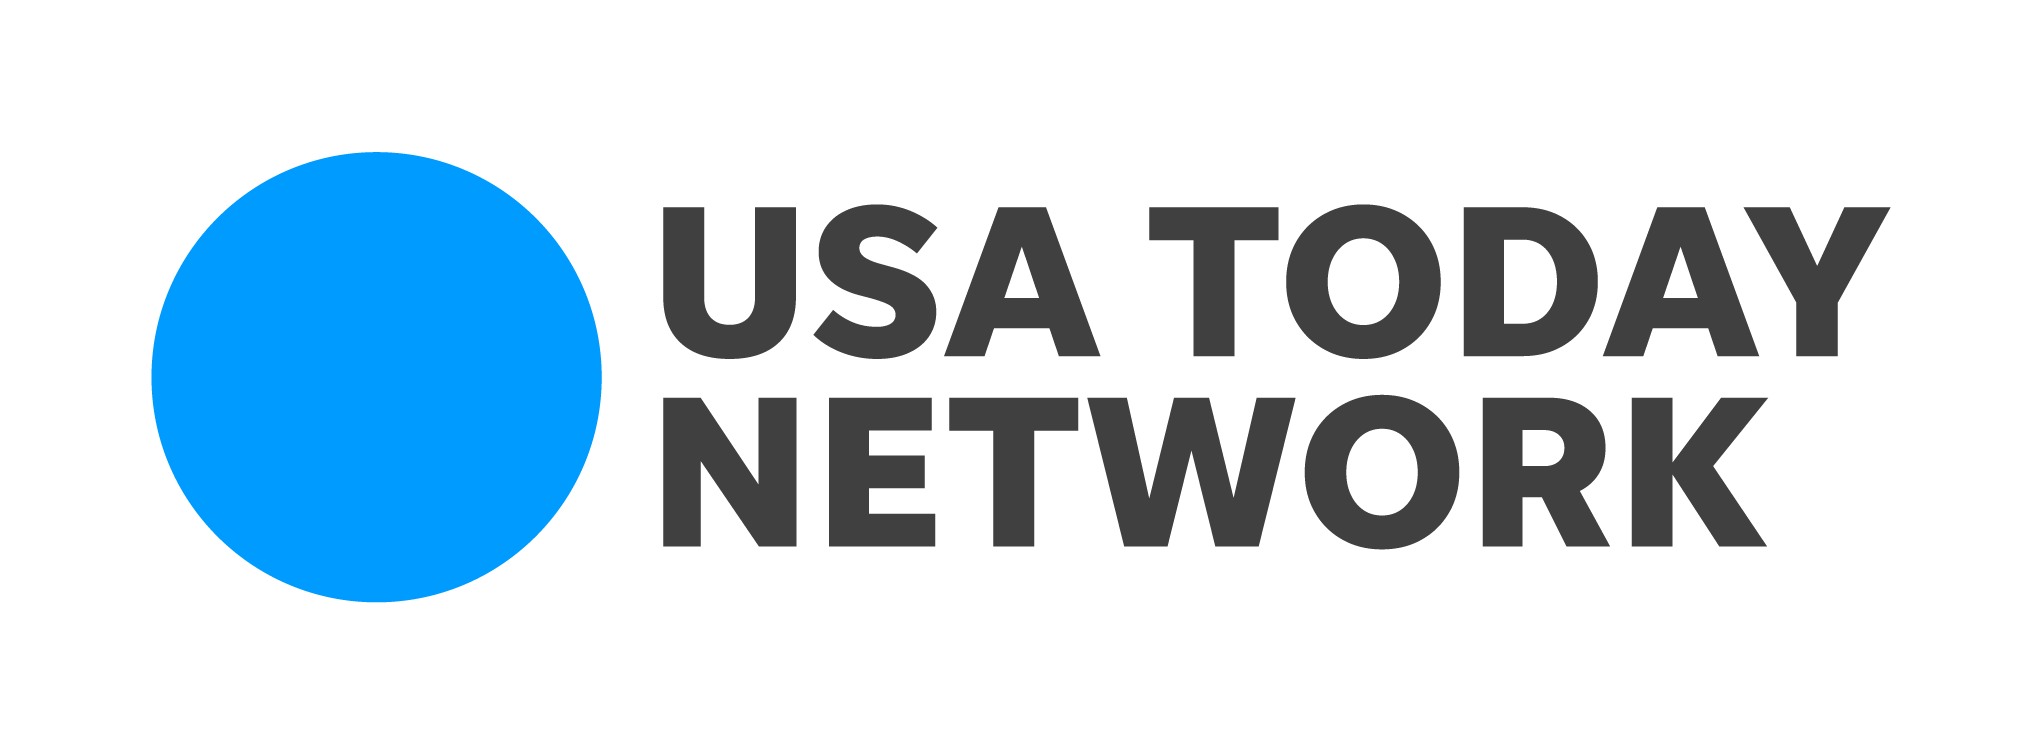 USA TODAY Network 